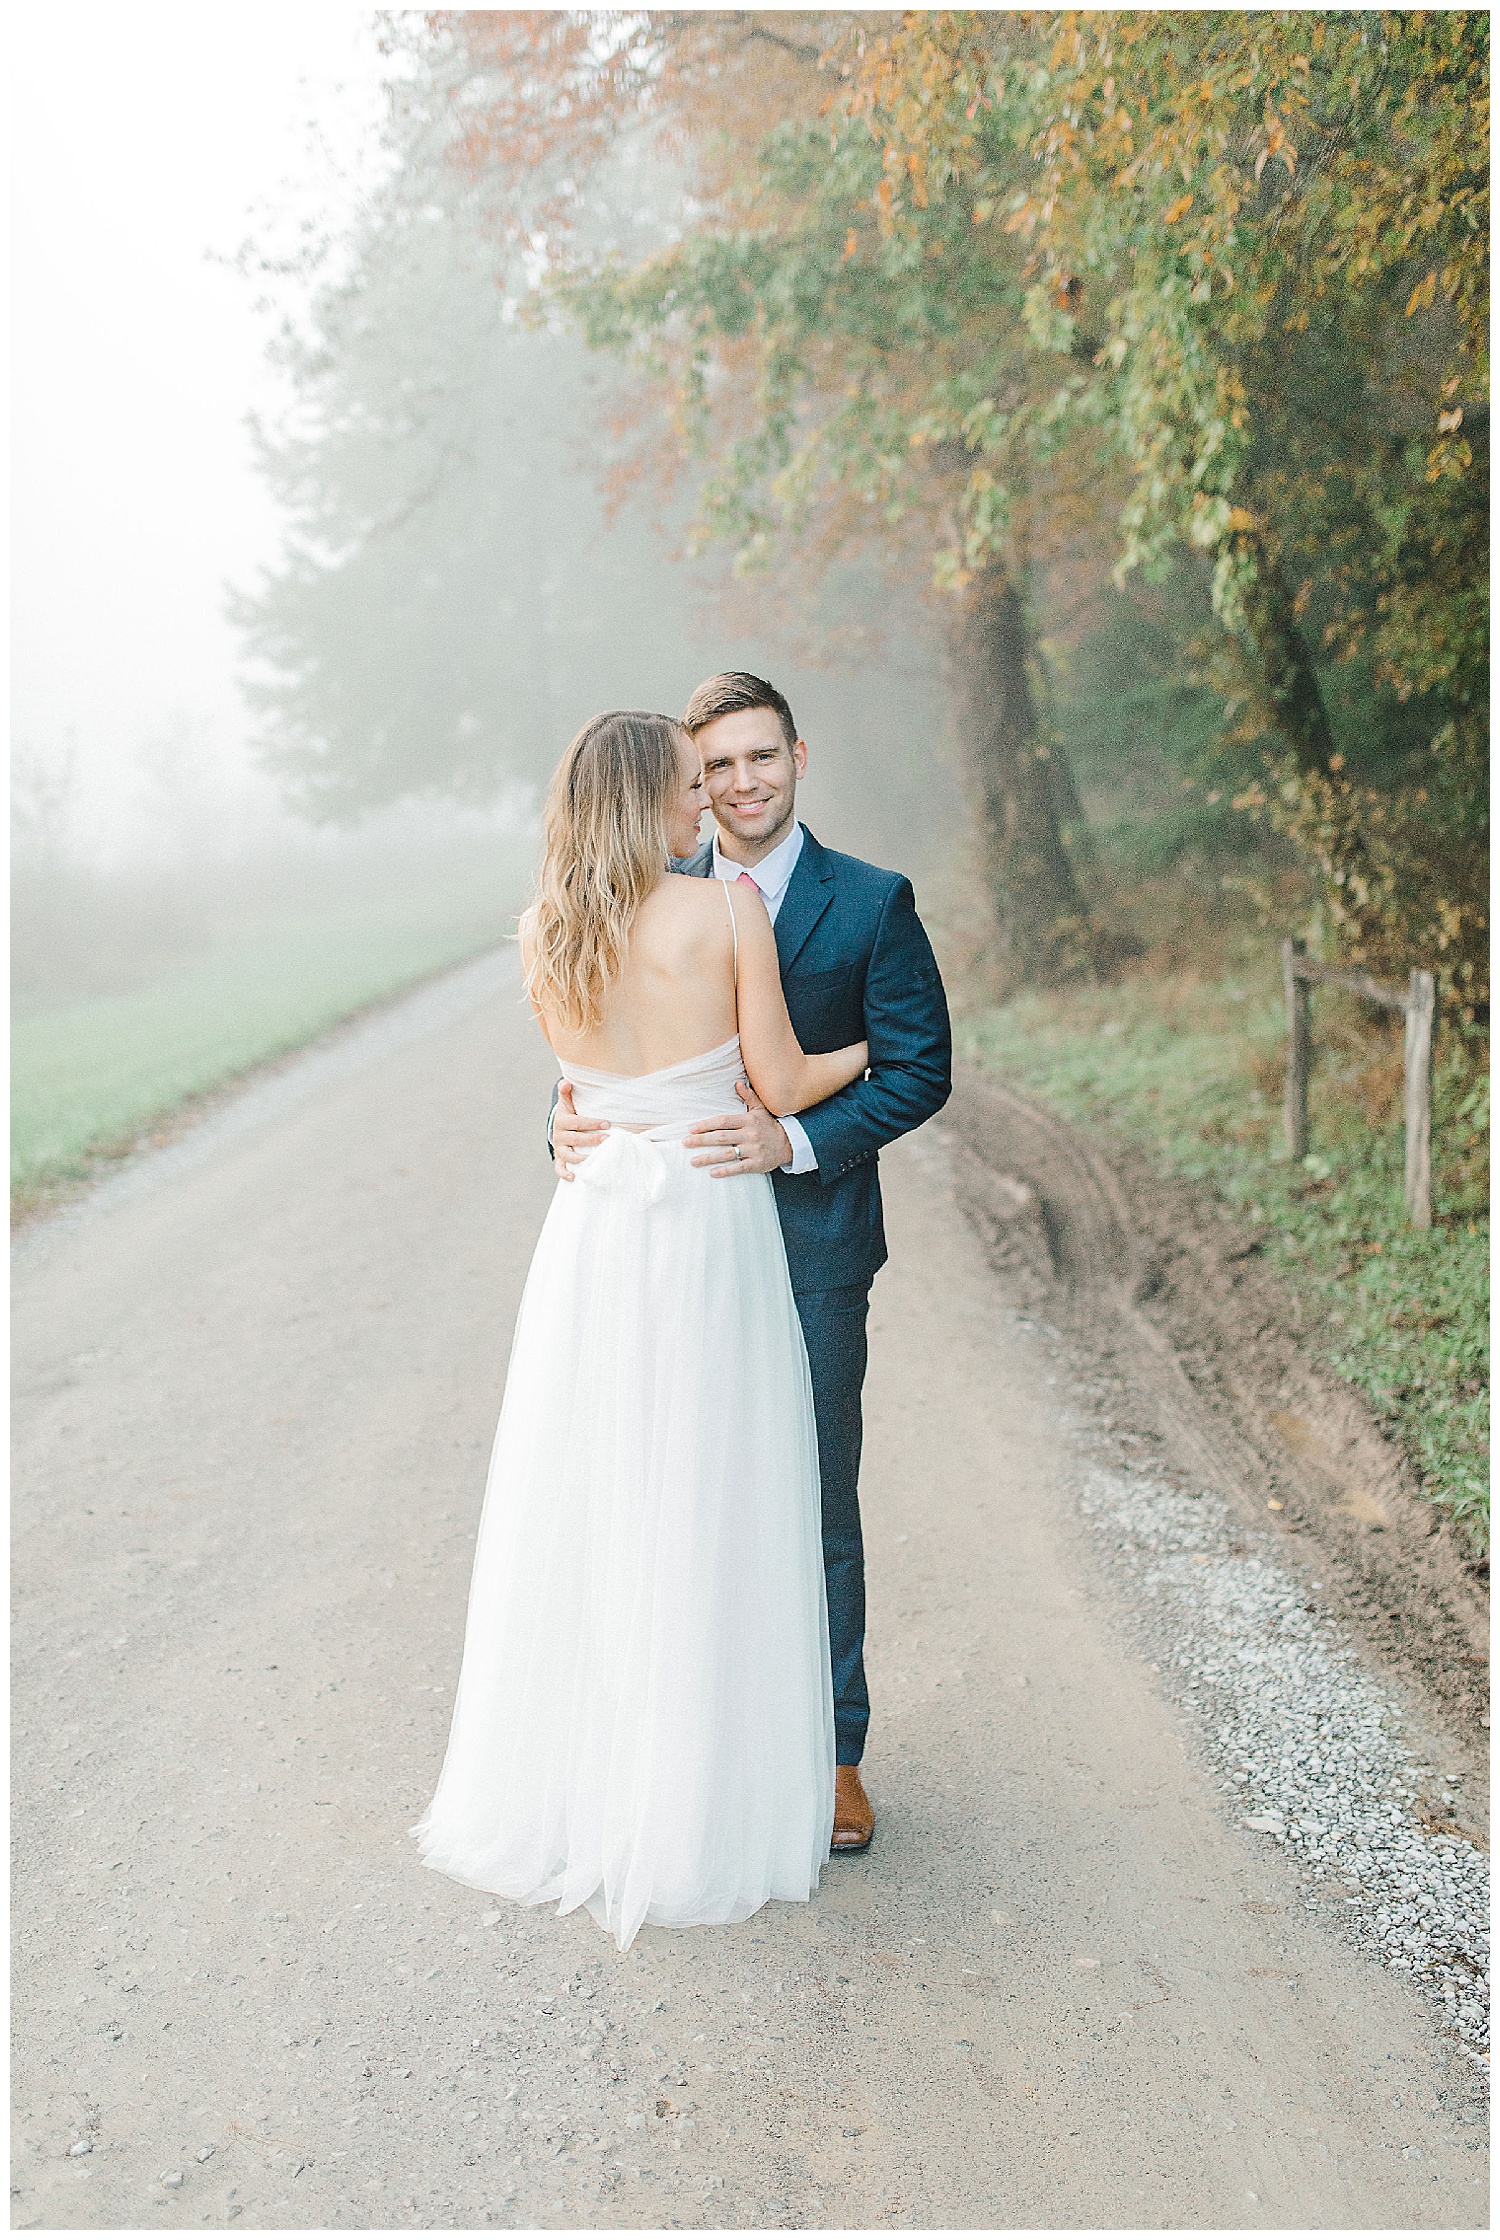 Emma Rose Company recently got to travel all the way to Nashville to photograph the most beautiful post-wedding bride and groom portraits in the Great Smoky Mountains with a gorgeous couple! Nashville wedding inspiration at it's finest._0016.jpg